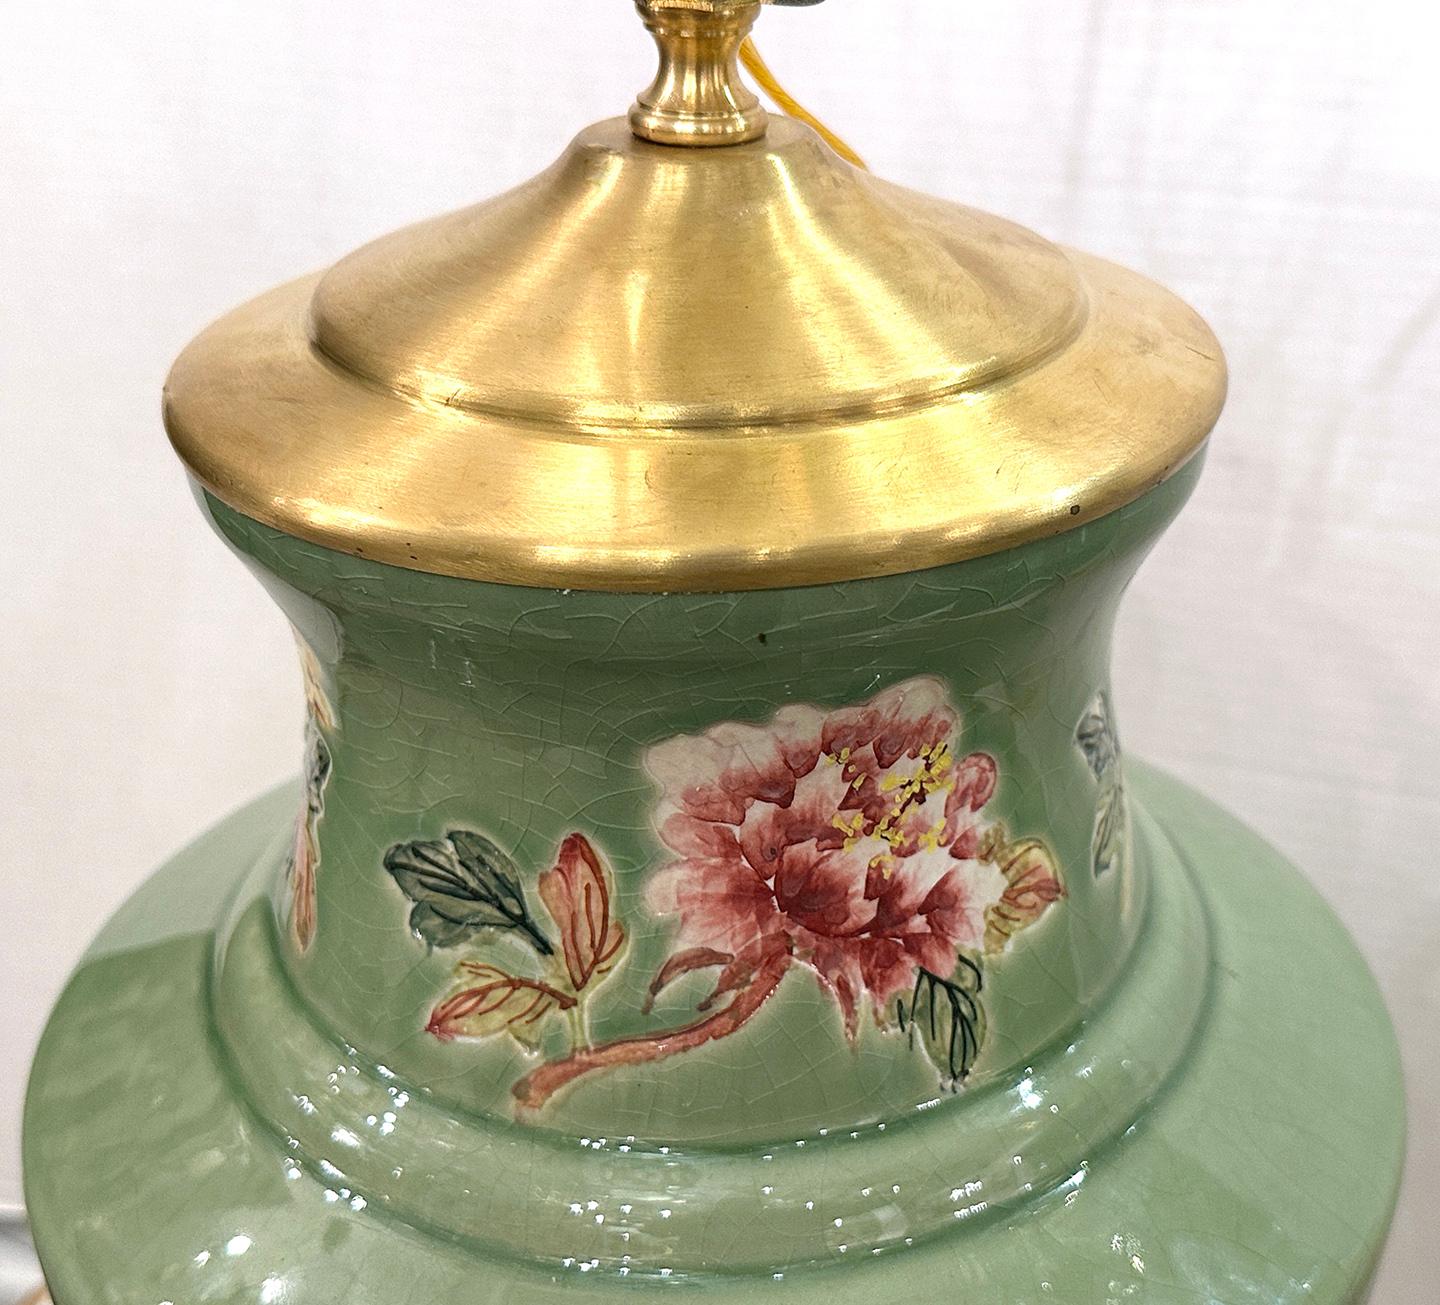 Pair of circa 1950's Chinese celadon floral lamps with floral decoration.

Measurements:
Height of body: 18